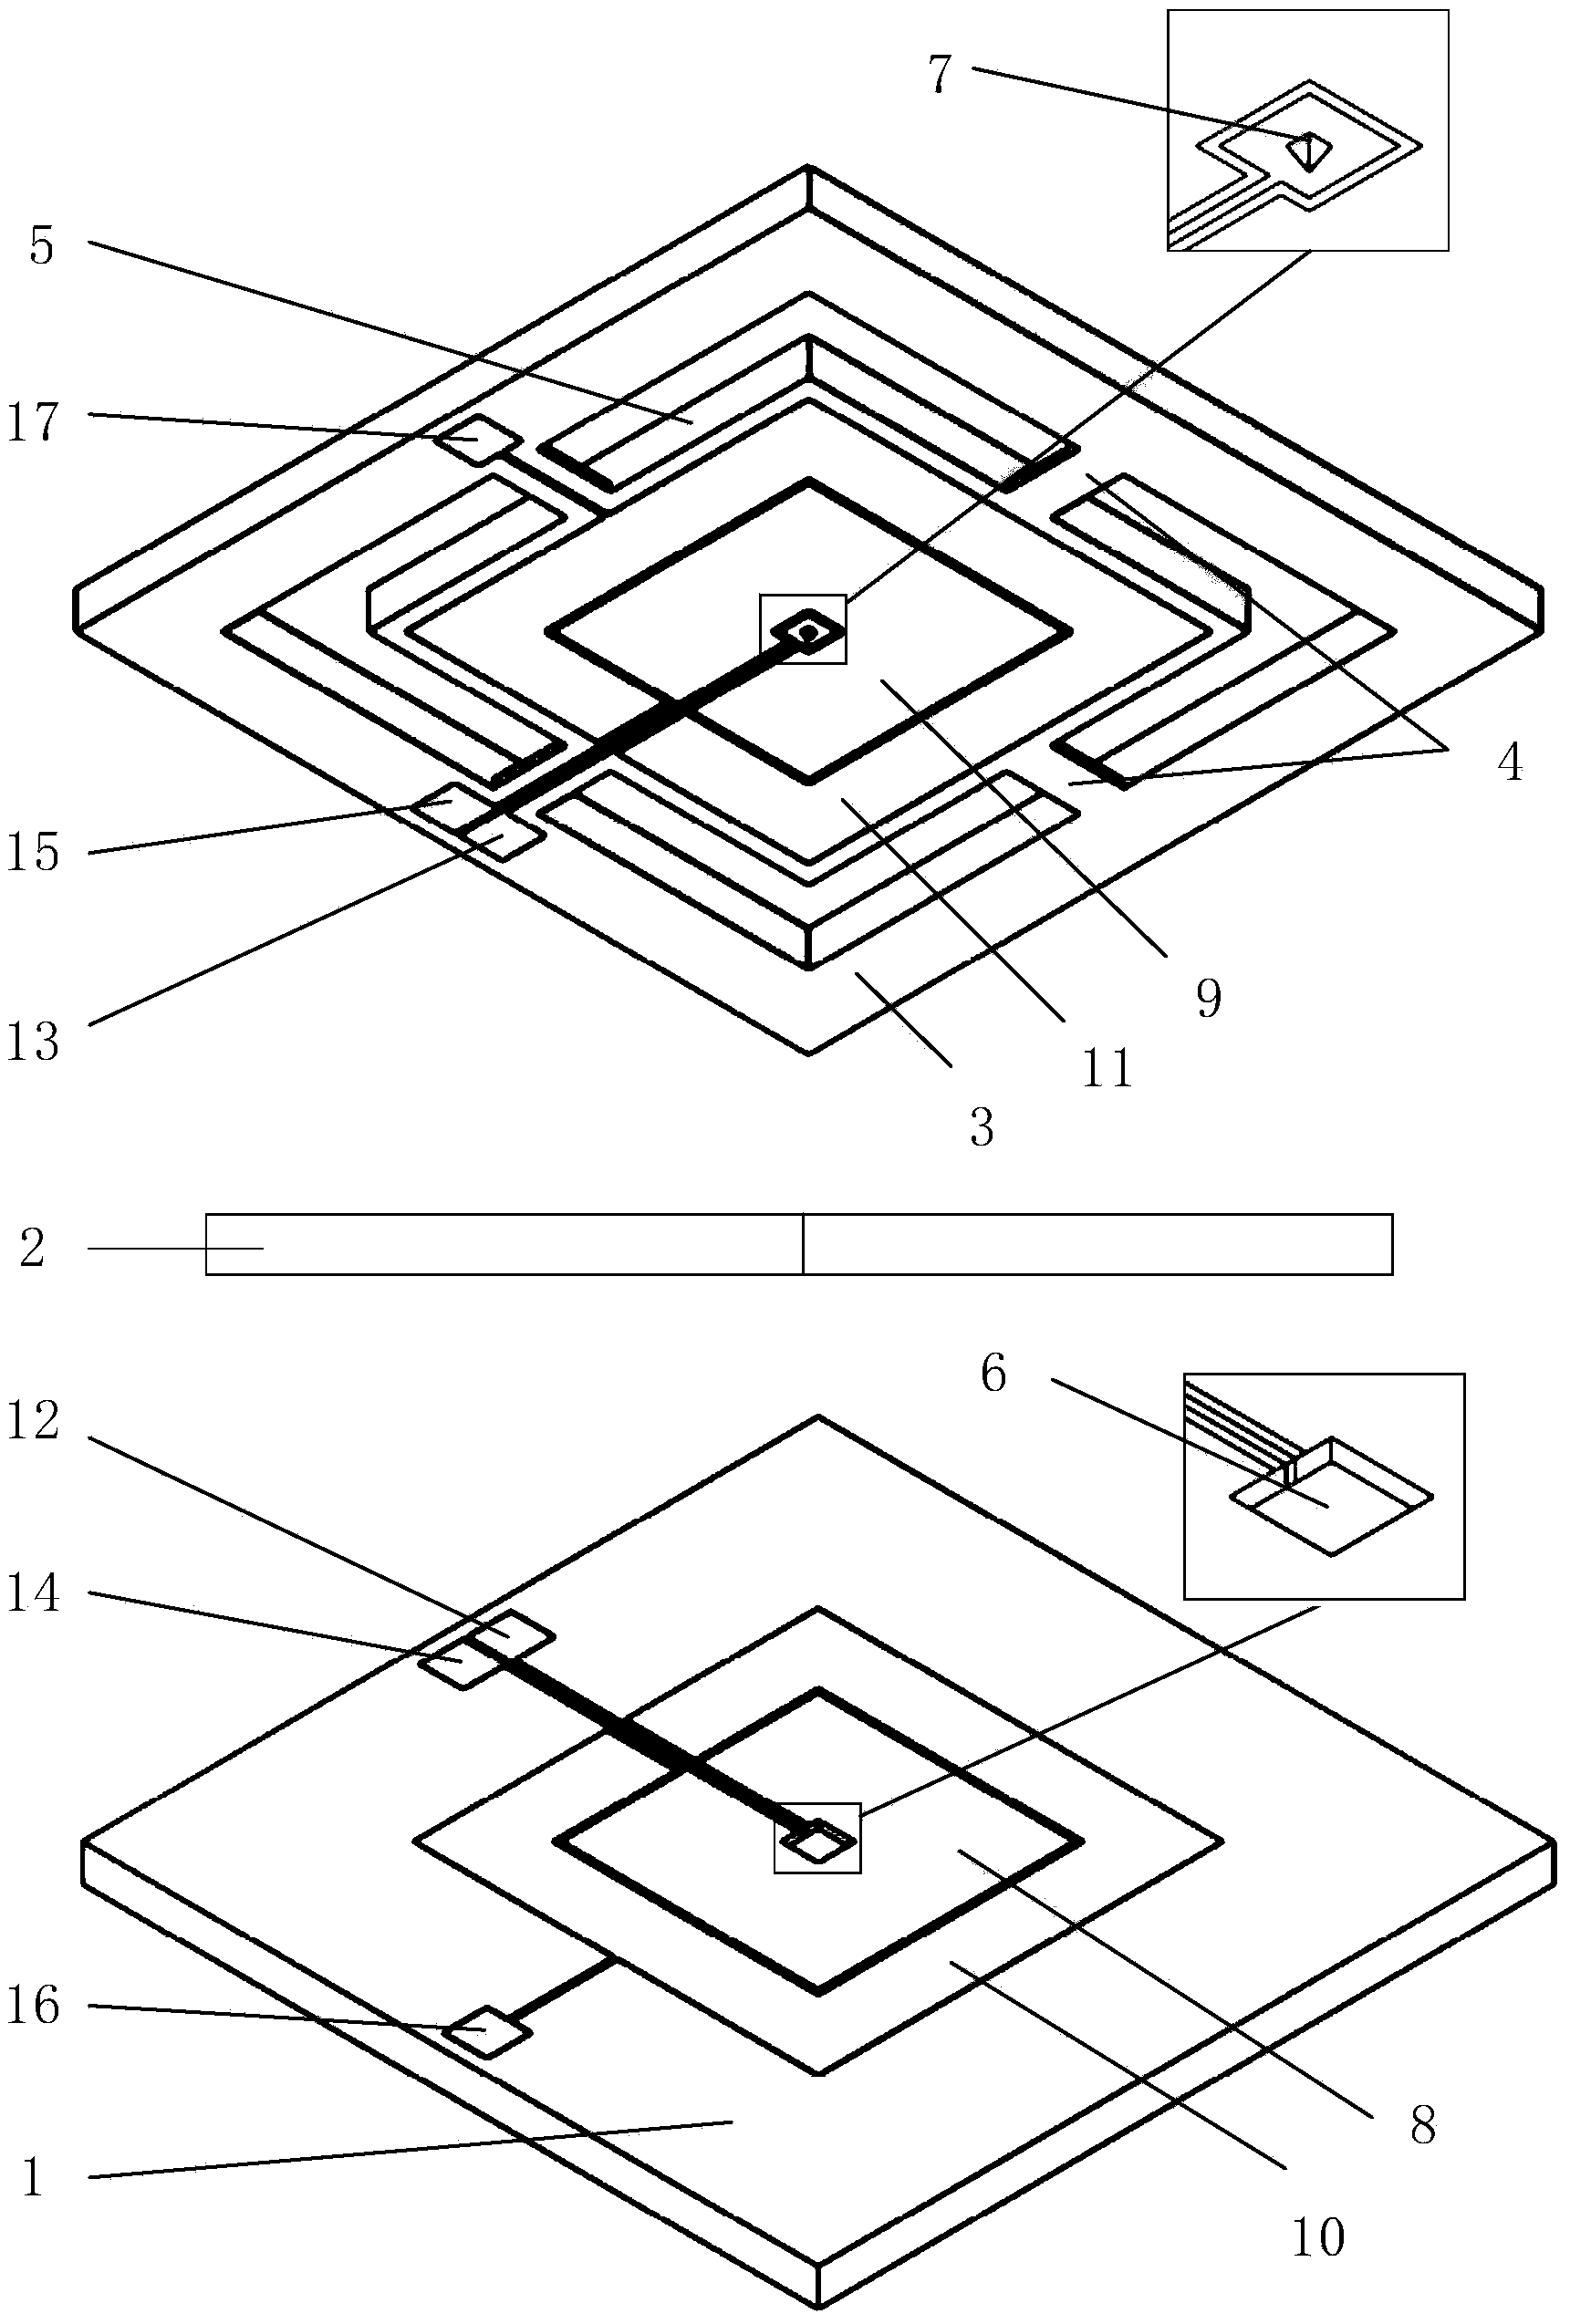 Composite accelerometer based on capacitance effect and tunnel effect